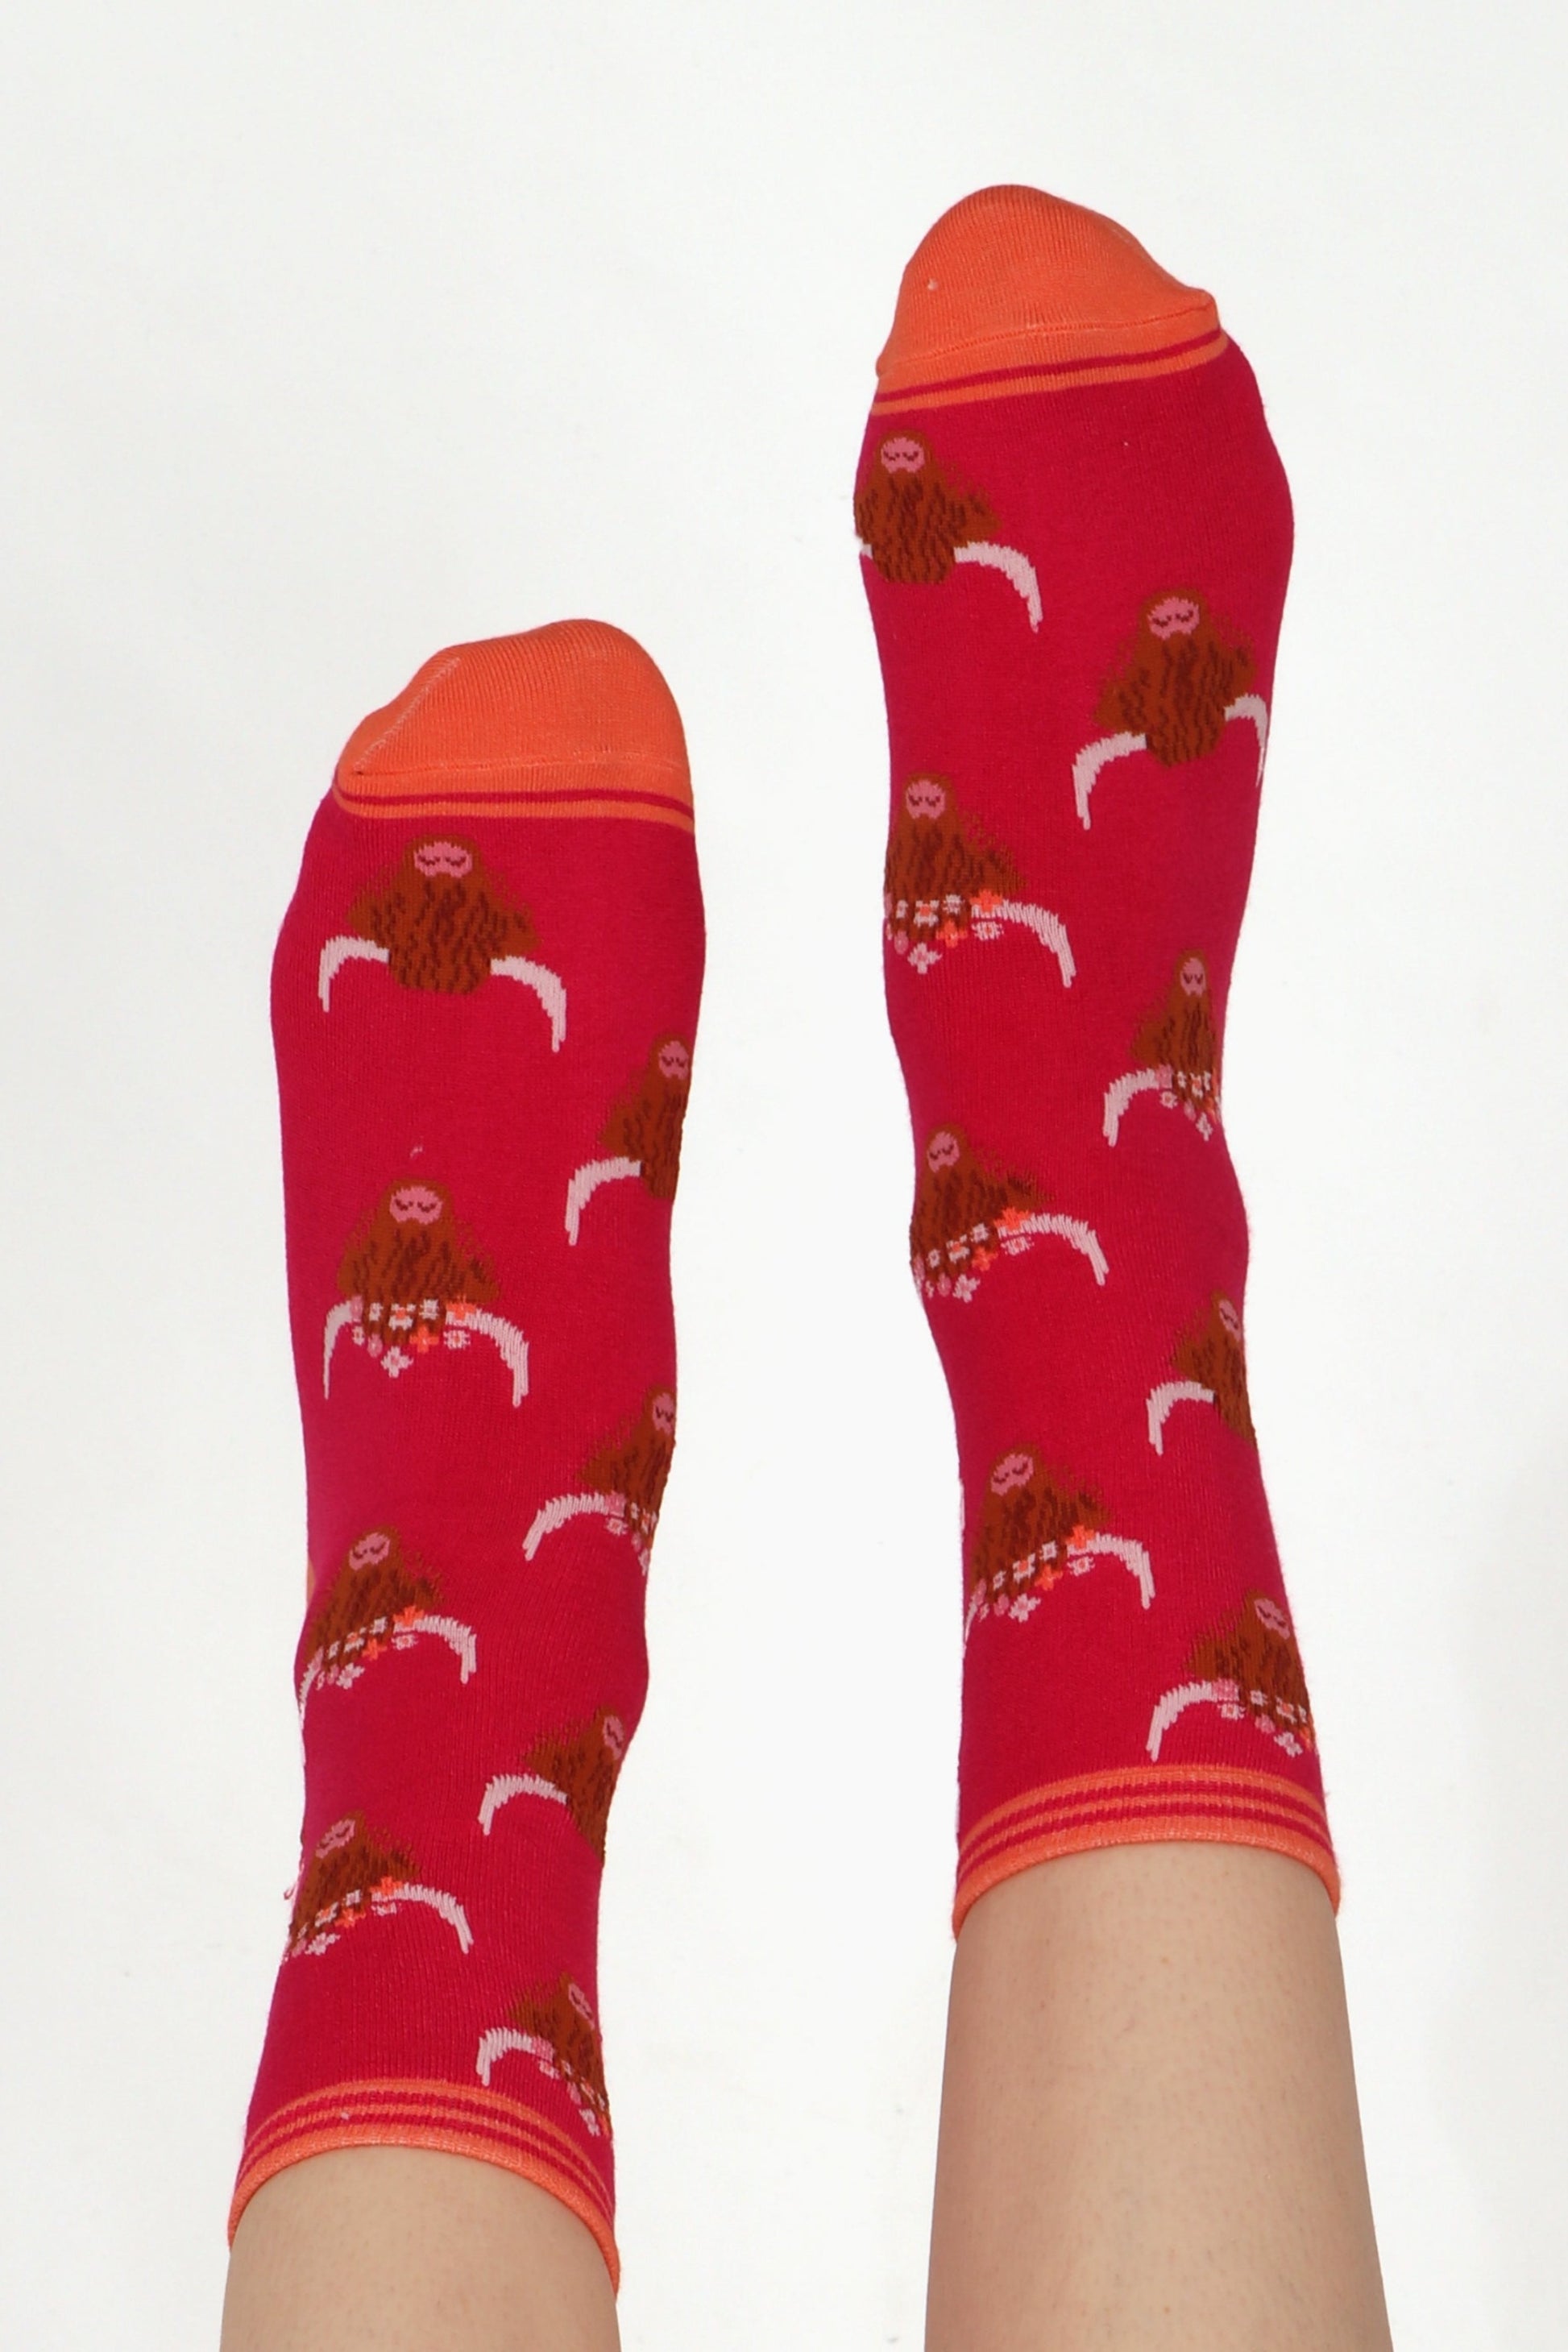 Ladies feet posed straight in the air wearing highland cow print socks. Cows are wearing flower crowns. Shows contrasting orange colour toe and cuff